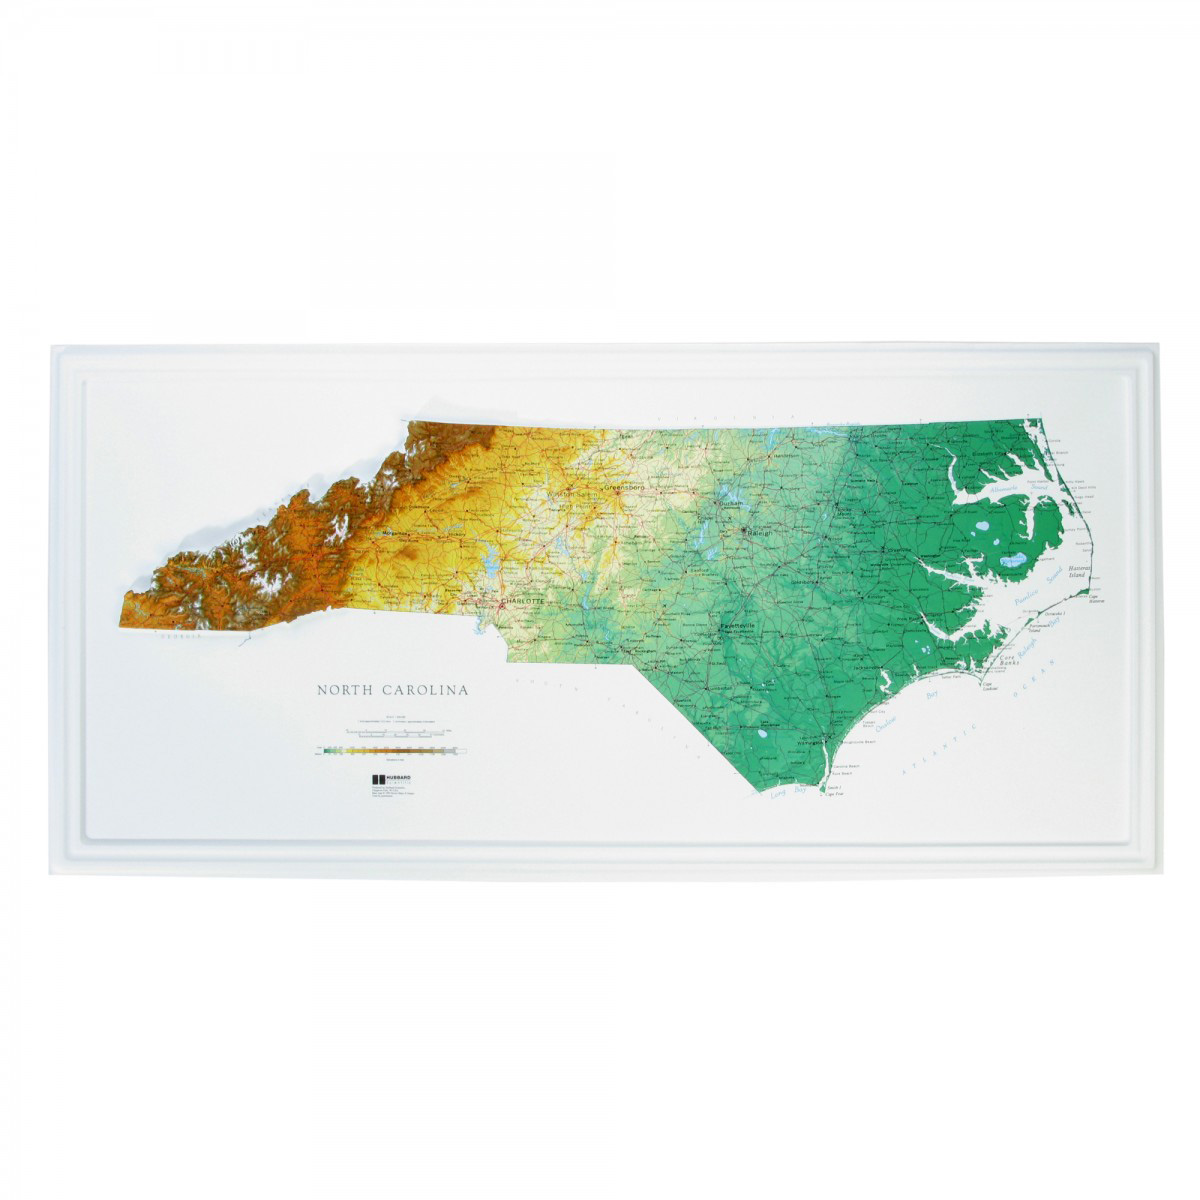 Picture of TestPlay 3076 39.5 x 18.5 in. North Carolina State Raised Relief Map, Rubberized Foam Backing - Large